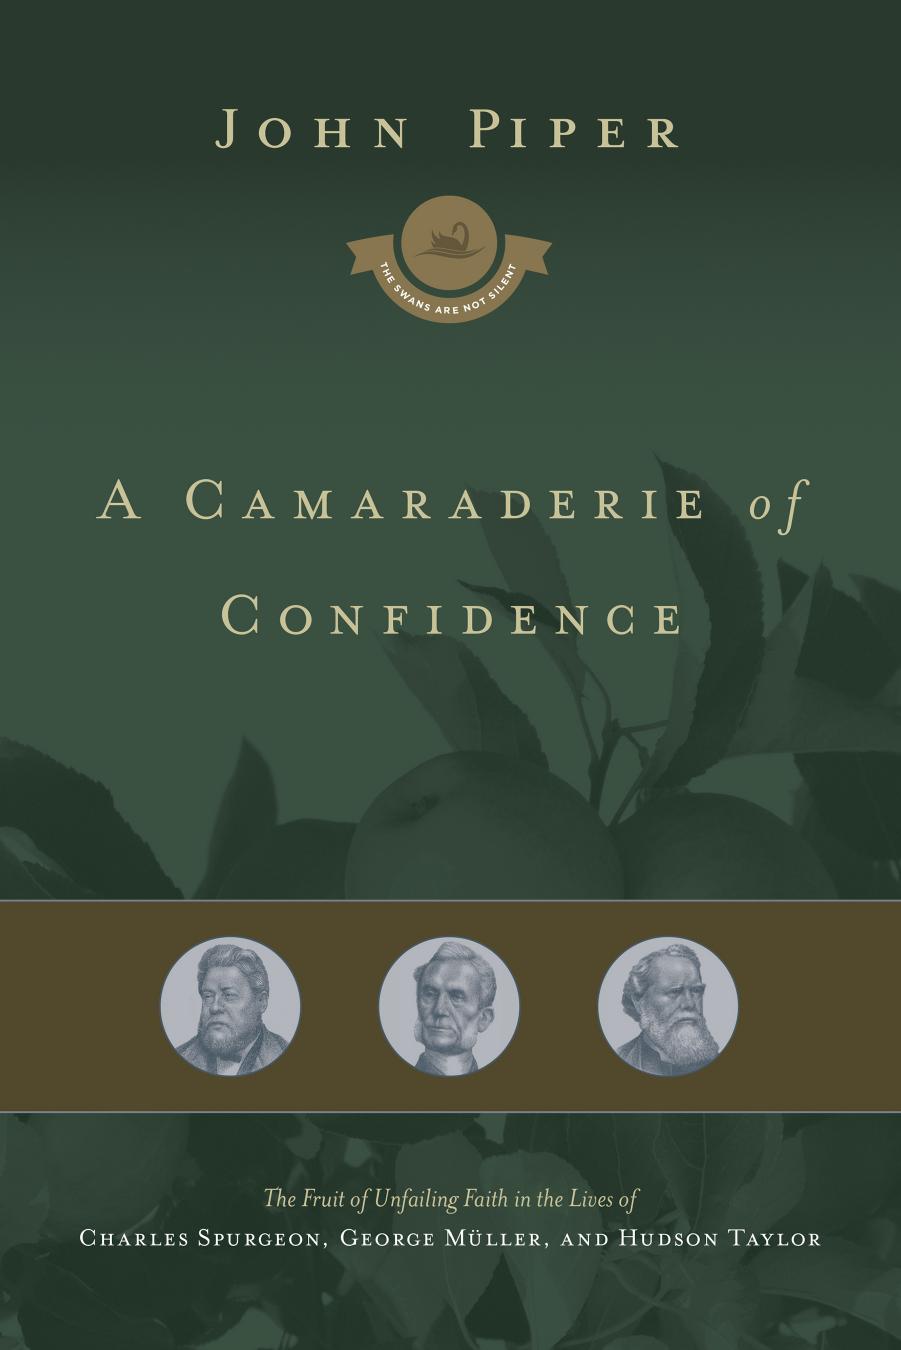 A Camaraderie of Confidence: The Fruit of Unfailing Faith in the Lives of Charles Spurgeon, George Müller and Hudson Taylor